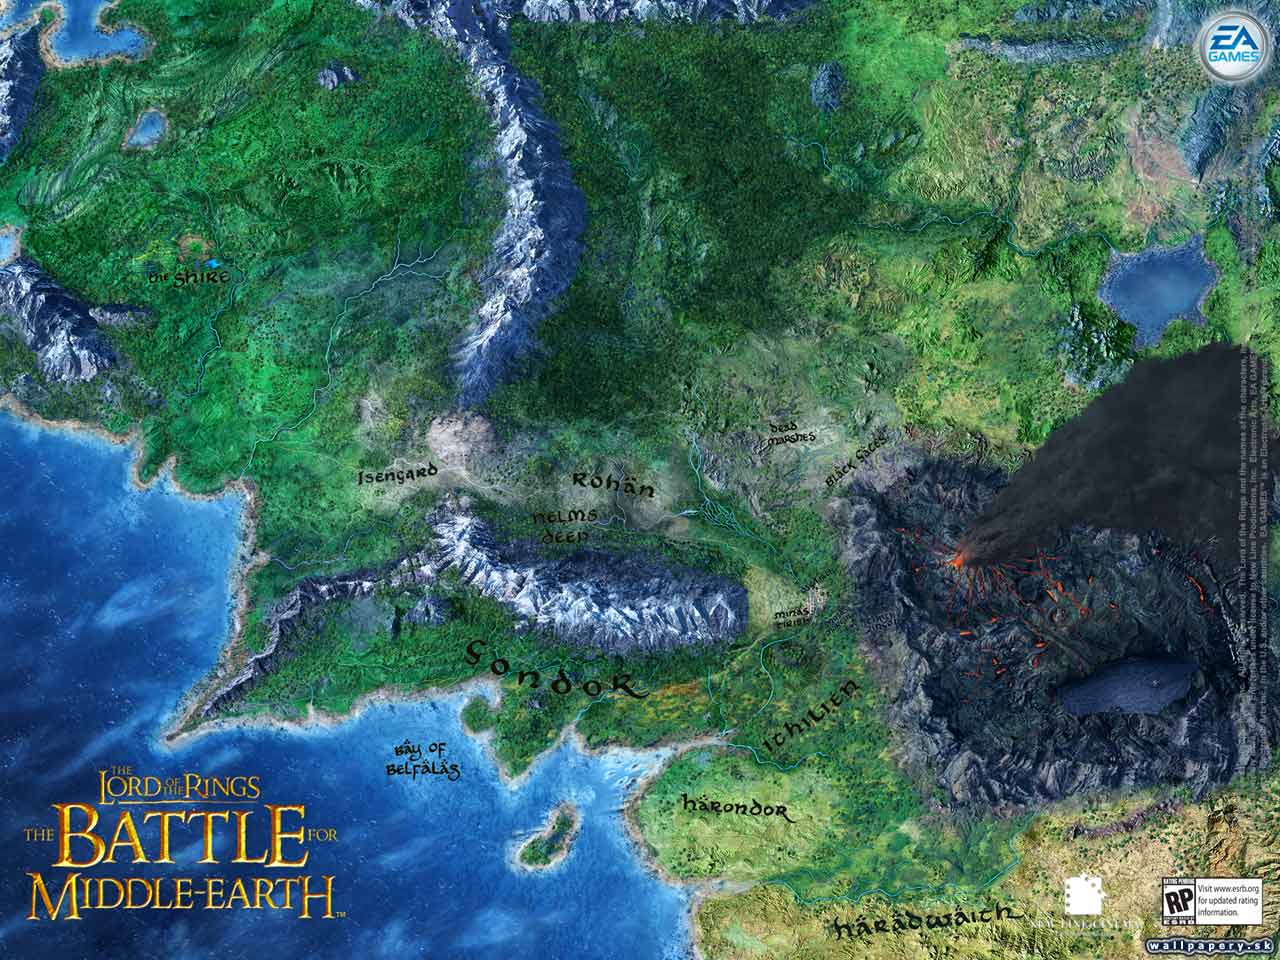 Lord of the Rings: The Battle For Middle-Earth - wallpaper 8